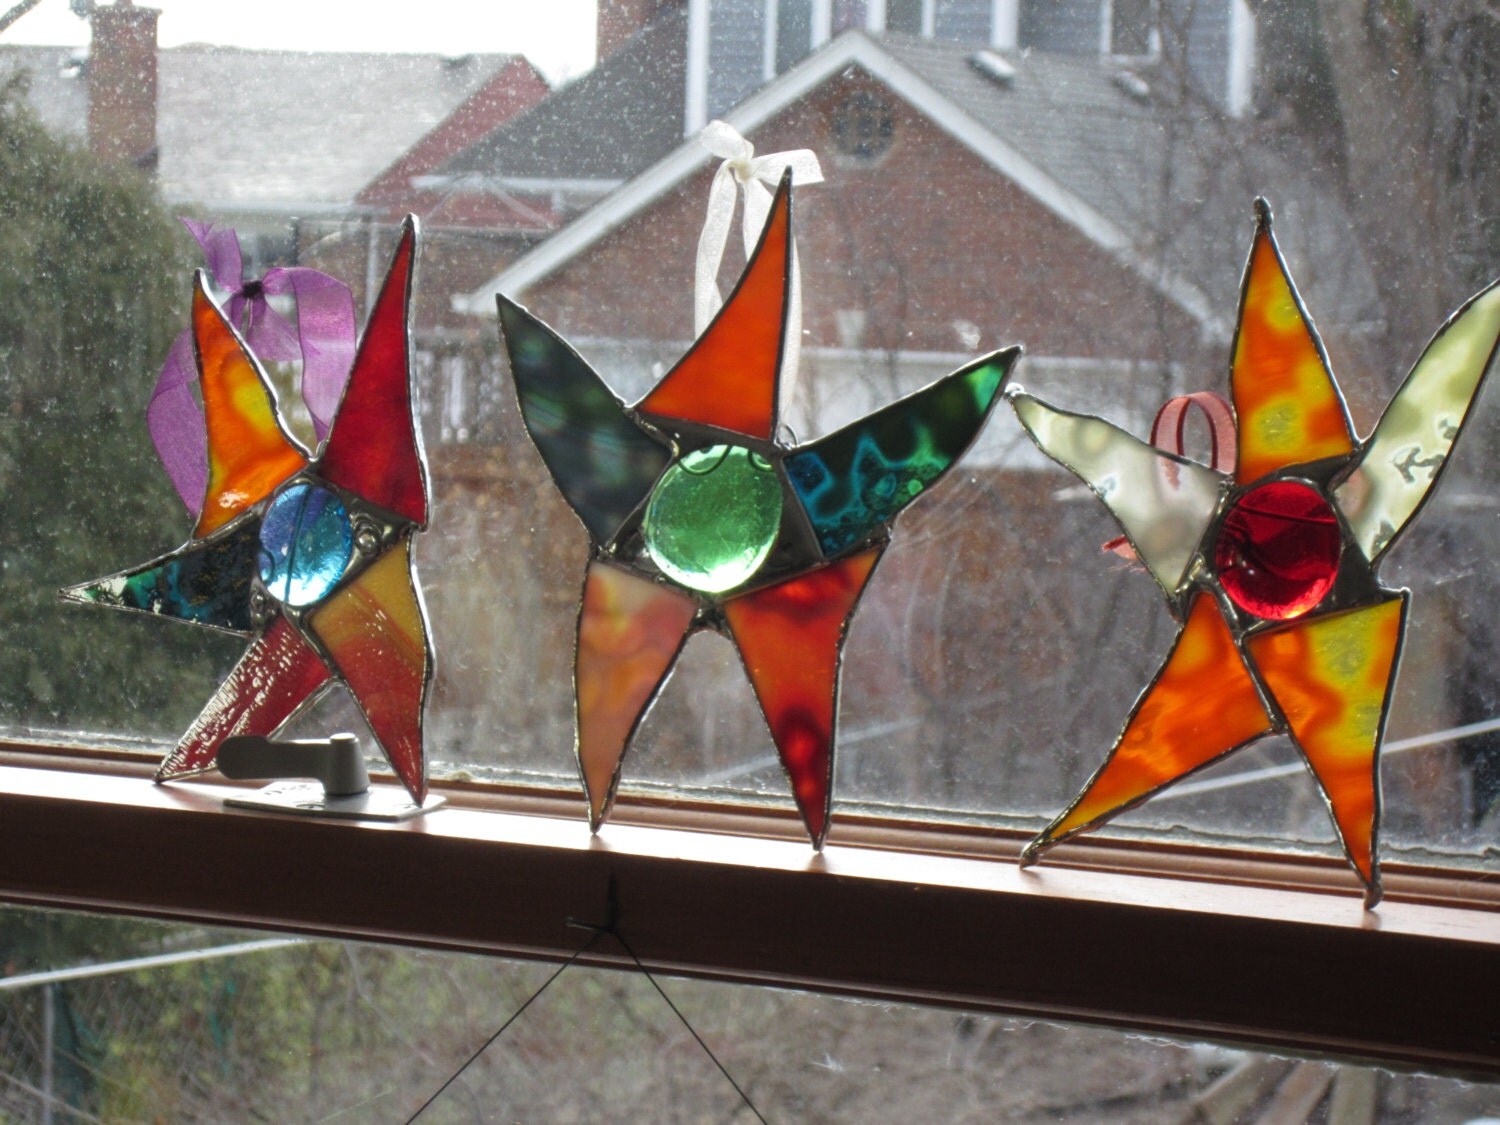 OUTDOOR ART decorations Stained glass GARDEN by stanfordglassshop